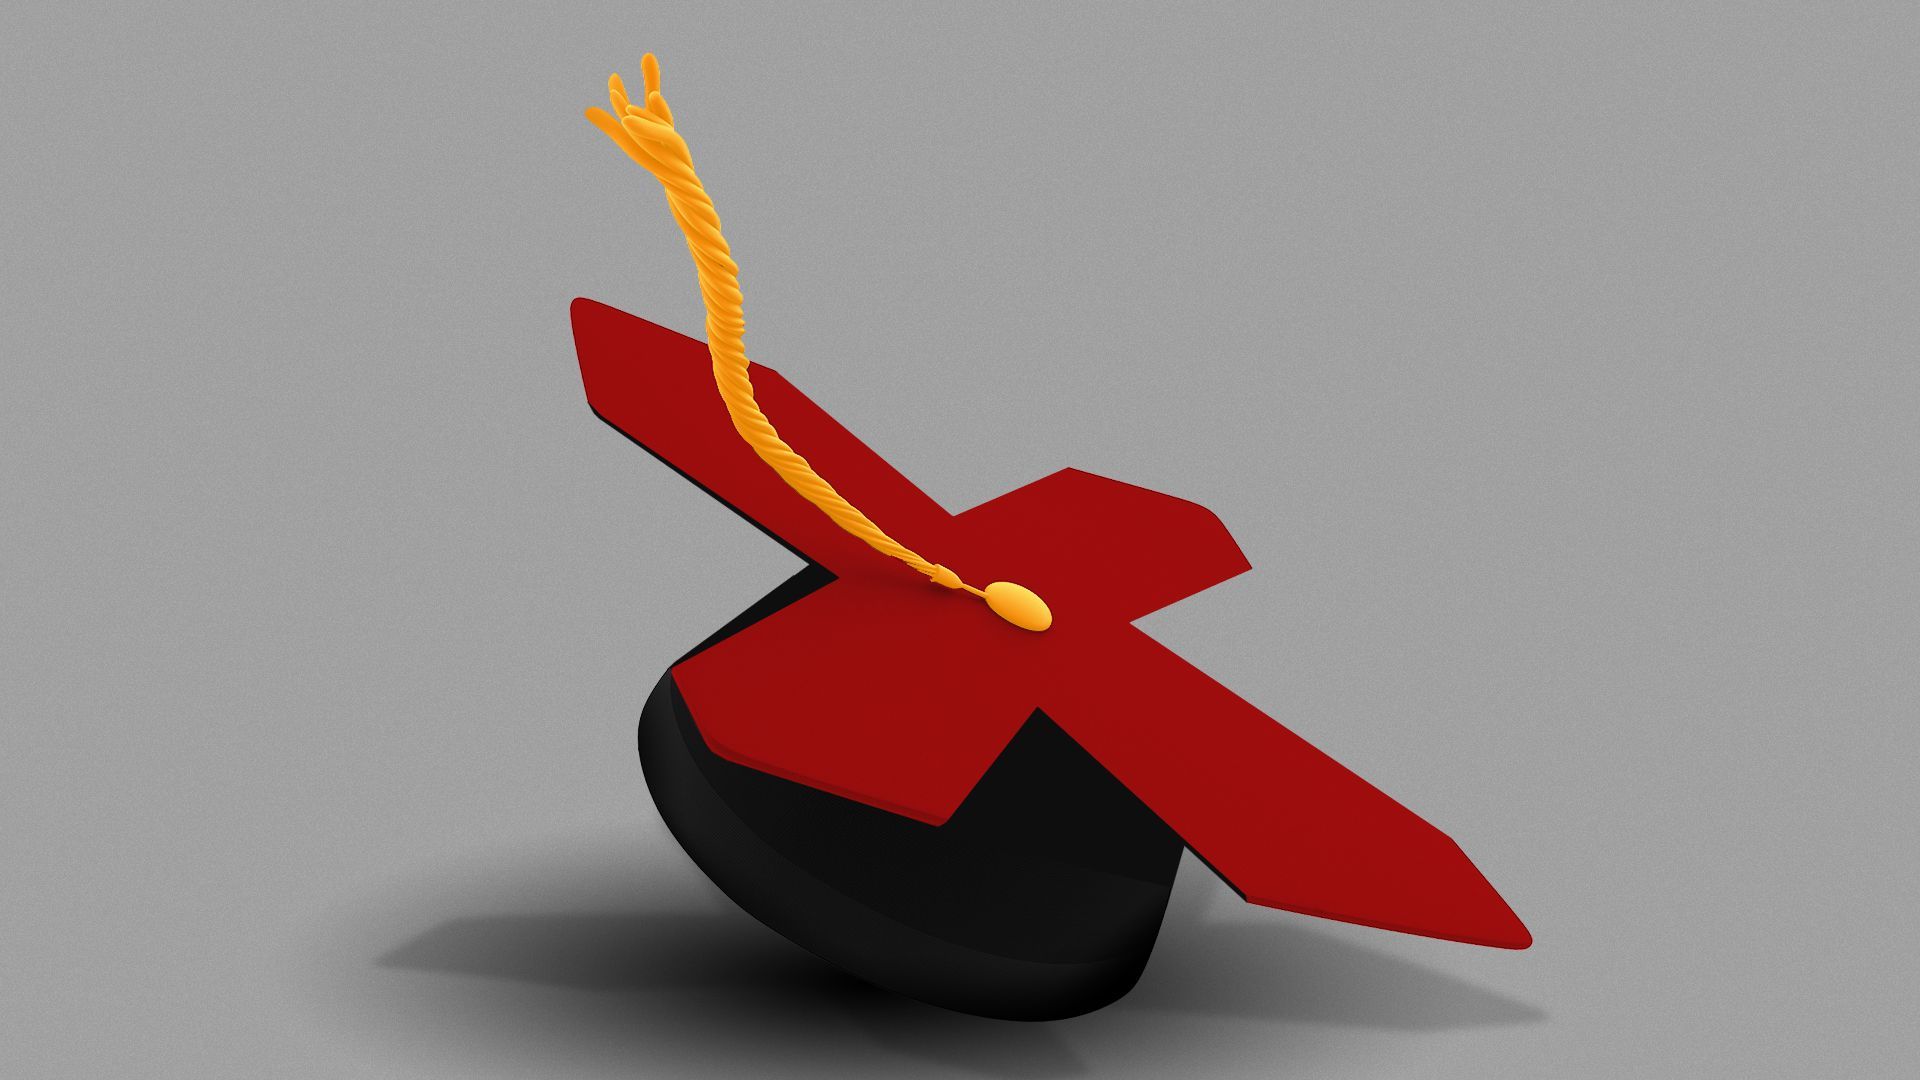 Illustration of a graduation cap with a top the shape of a red x